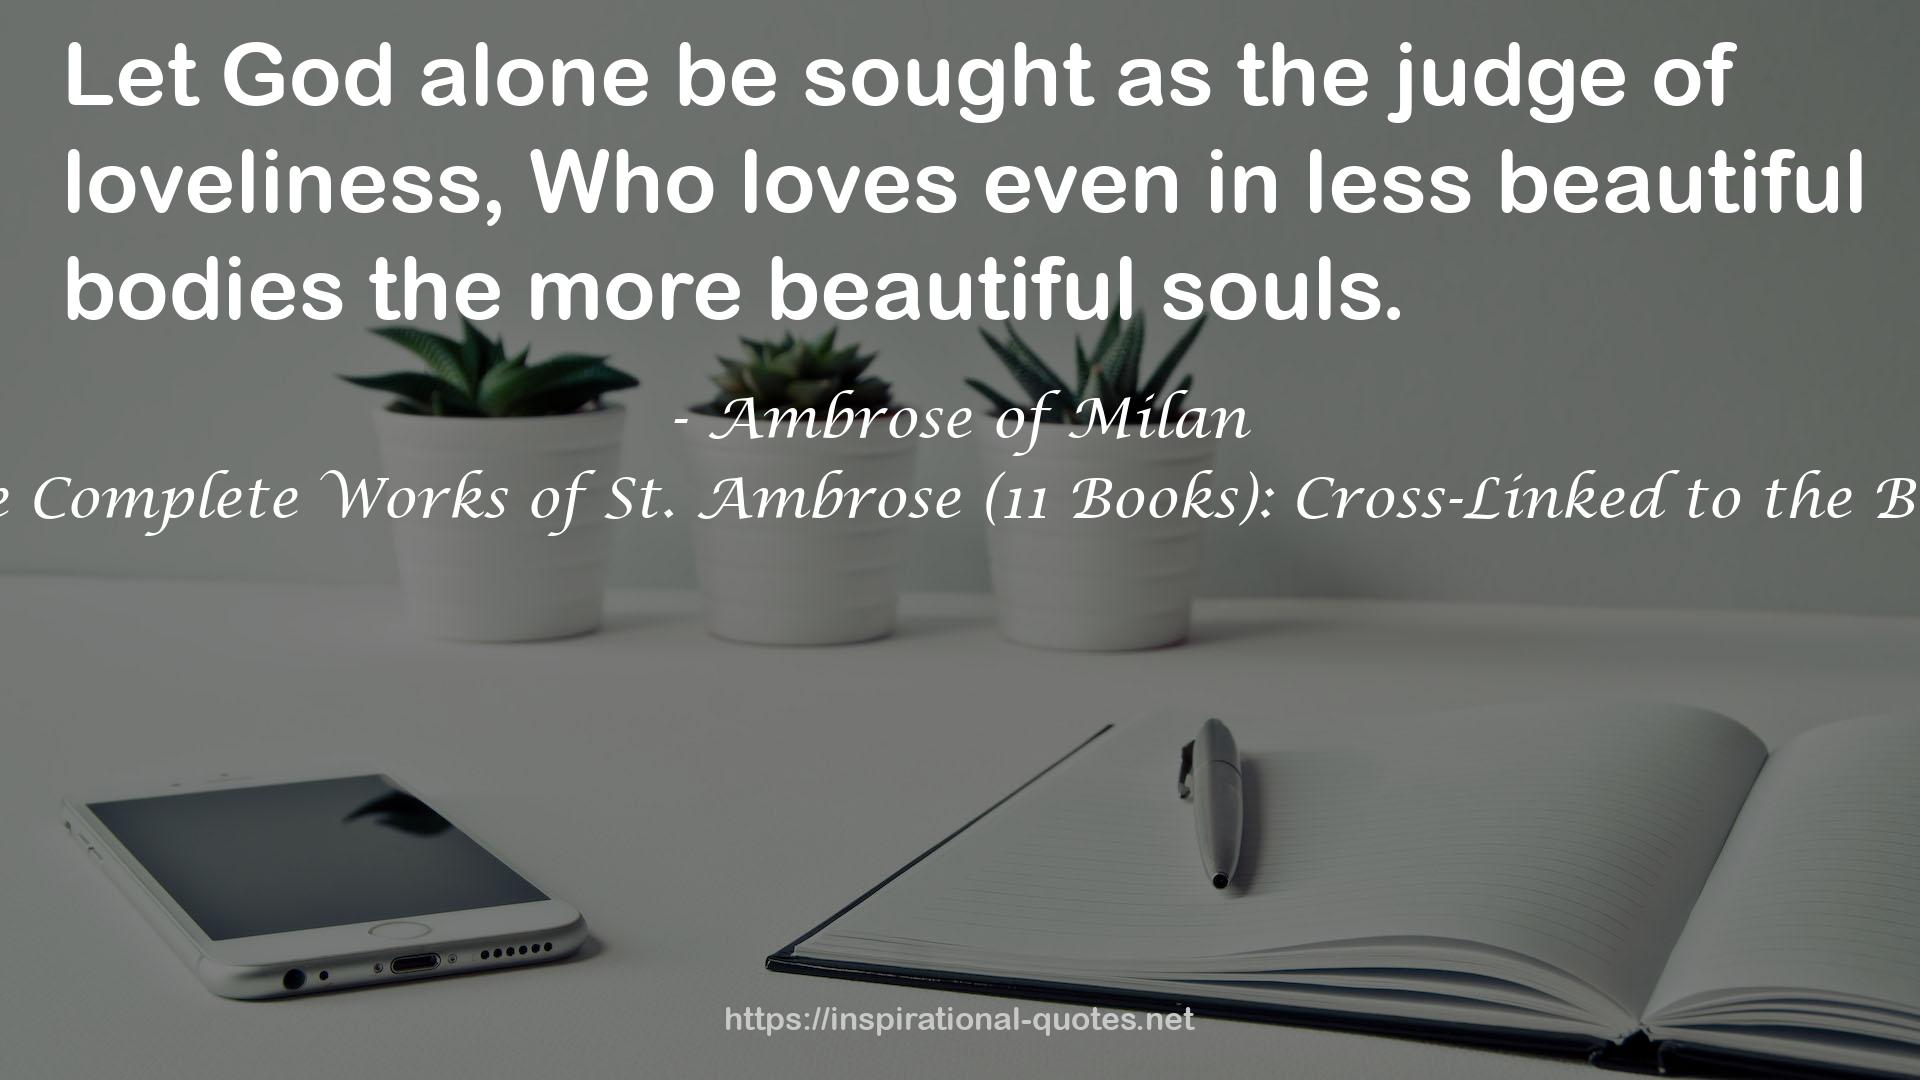 The Complete Works of St. Ambrose (11 Books): Cross-Linked to the Bible QUOTES